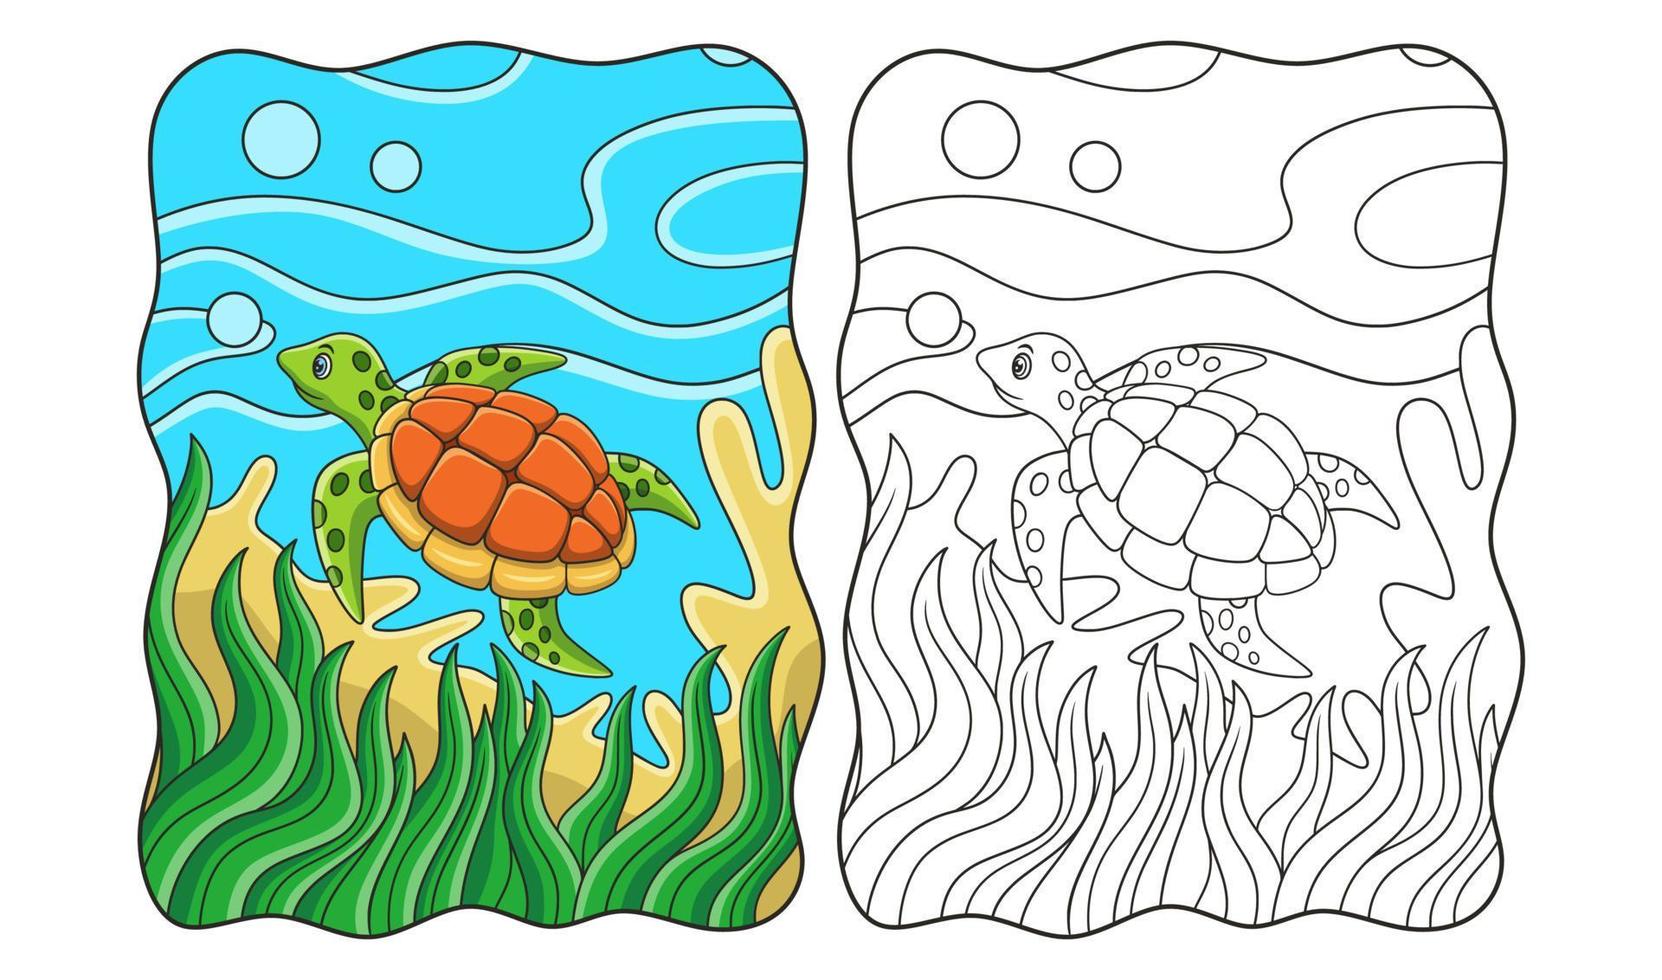 cartoon illustration turtles are swimming in the sea with some coral reefs and marine plants book or page for kids vector